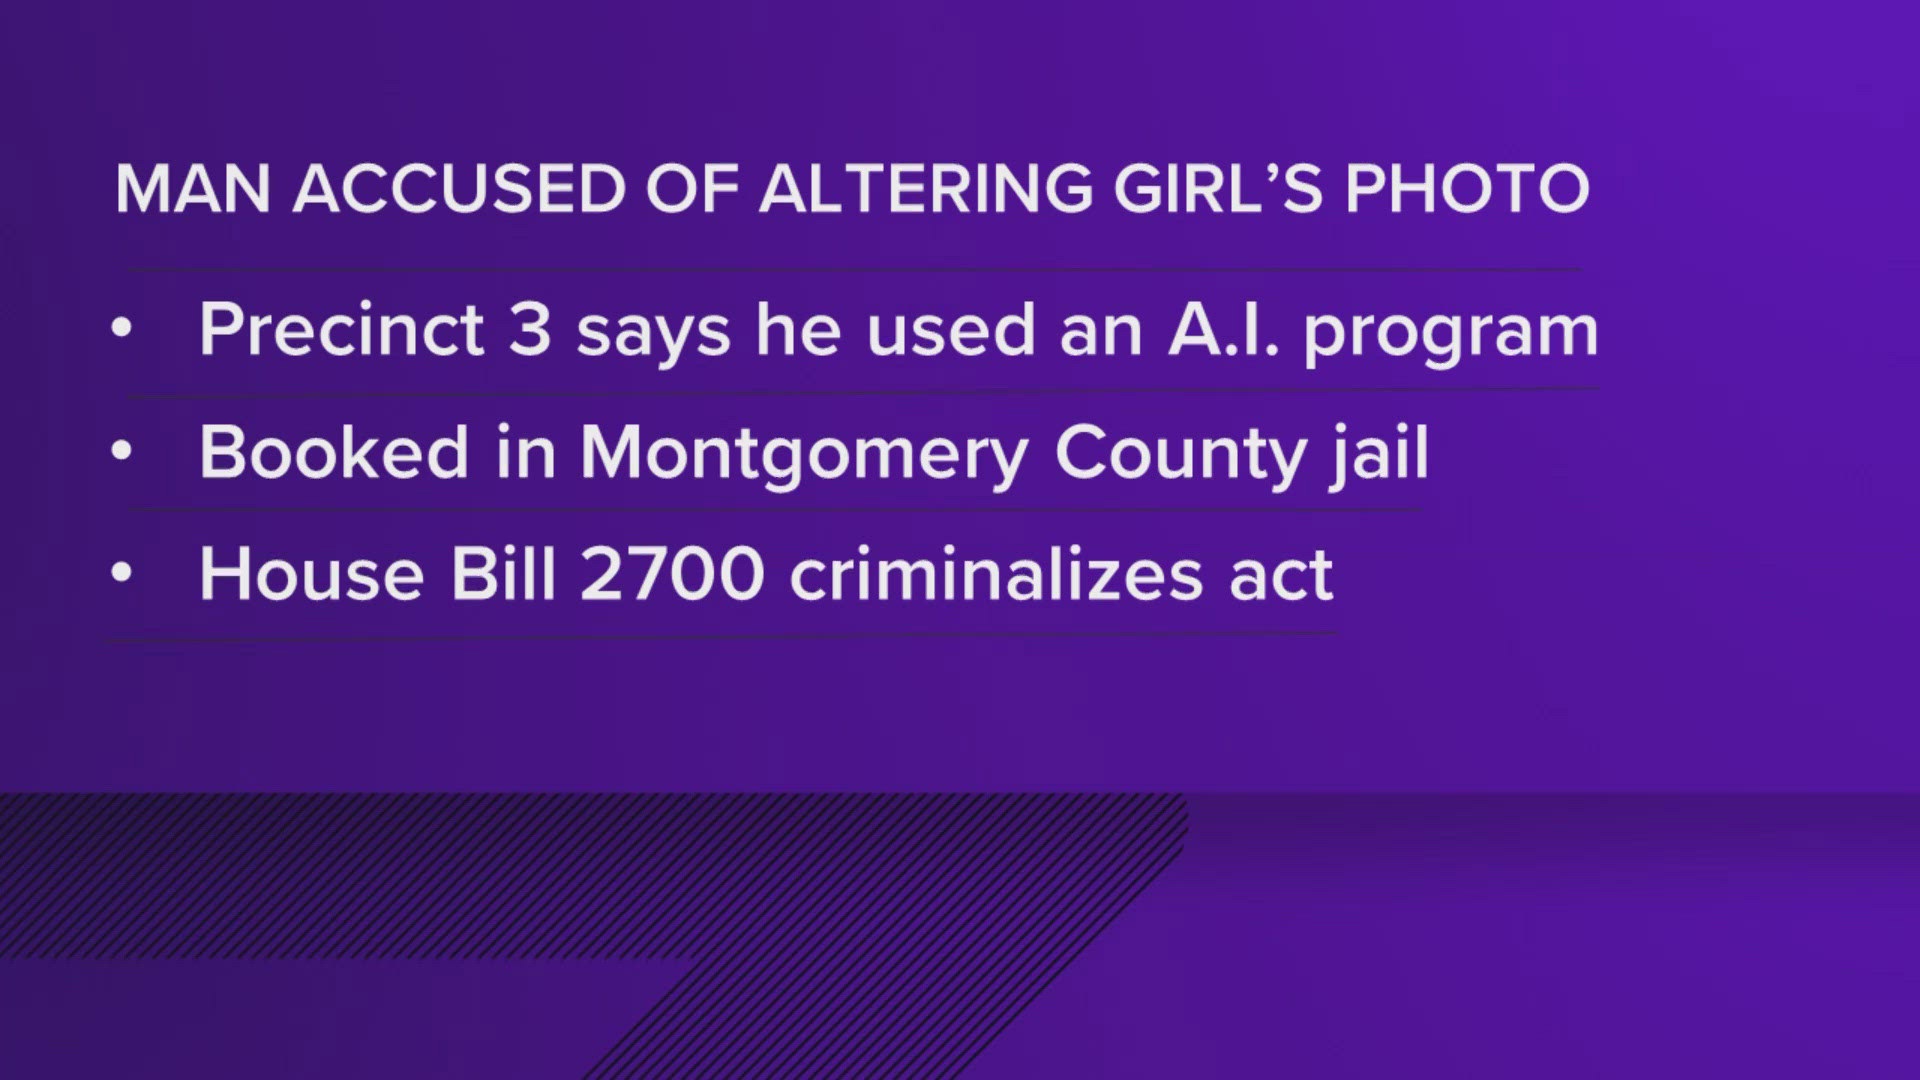 Roman Shoffner, 30, used an artificial intelligence program on his cellphone to alter a picture of a 17-year-old girl by removing her clothing.